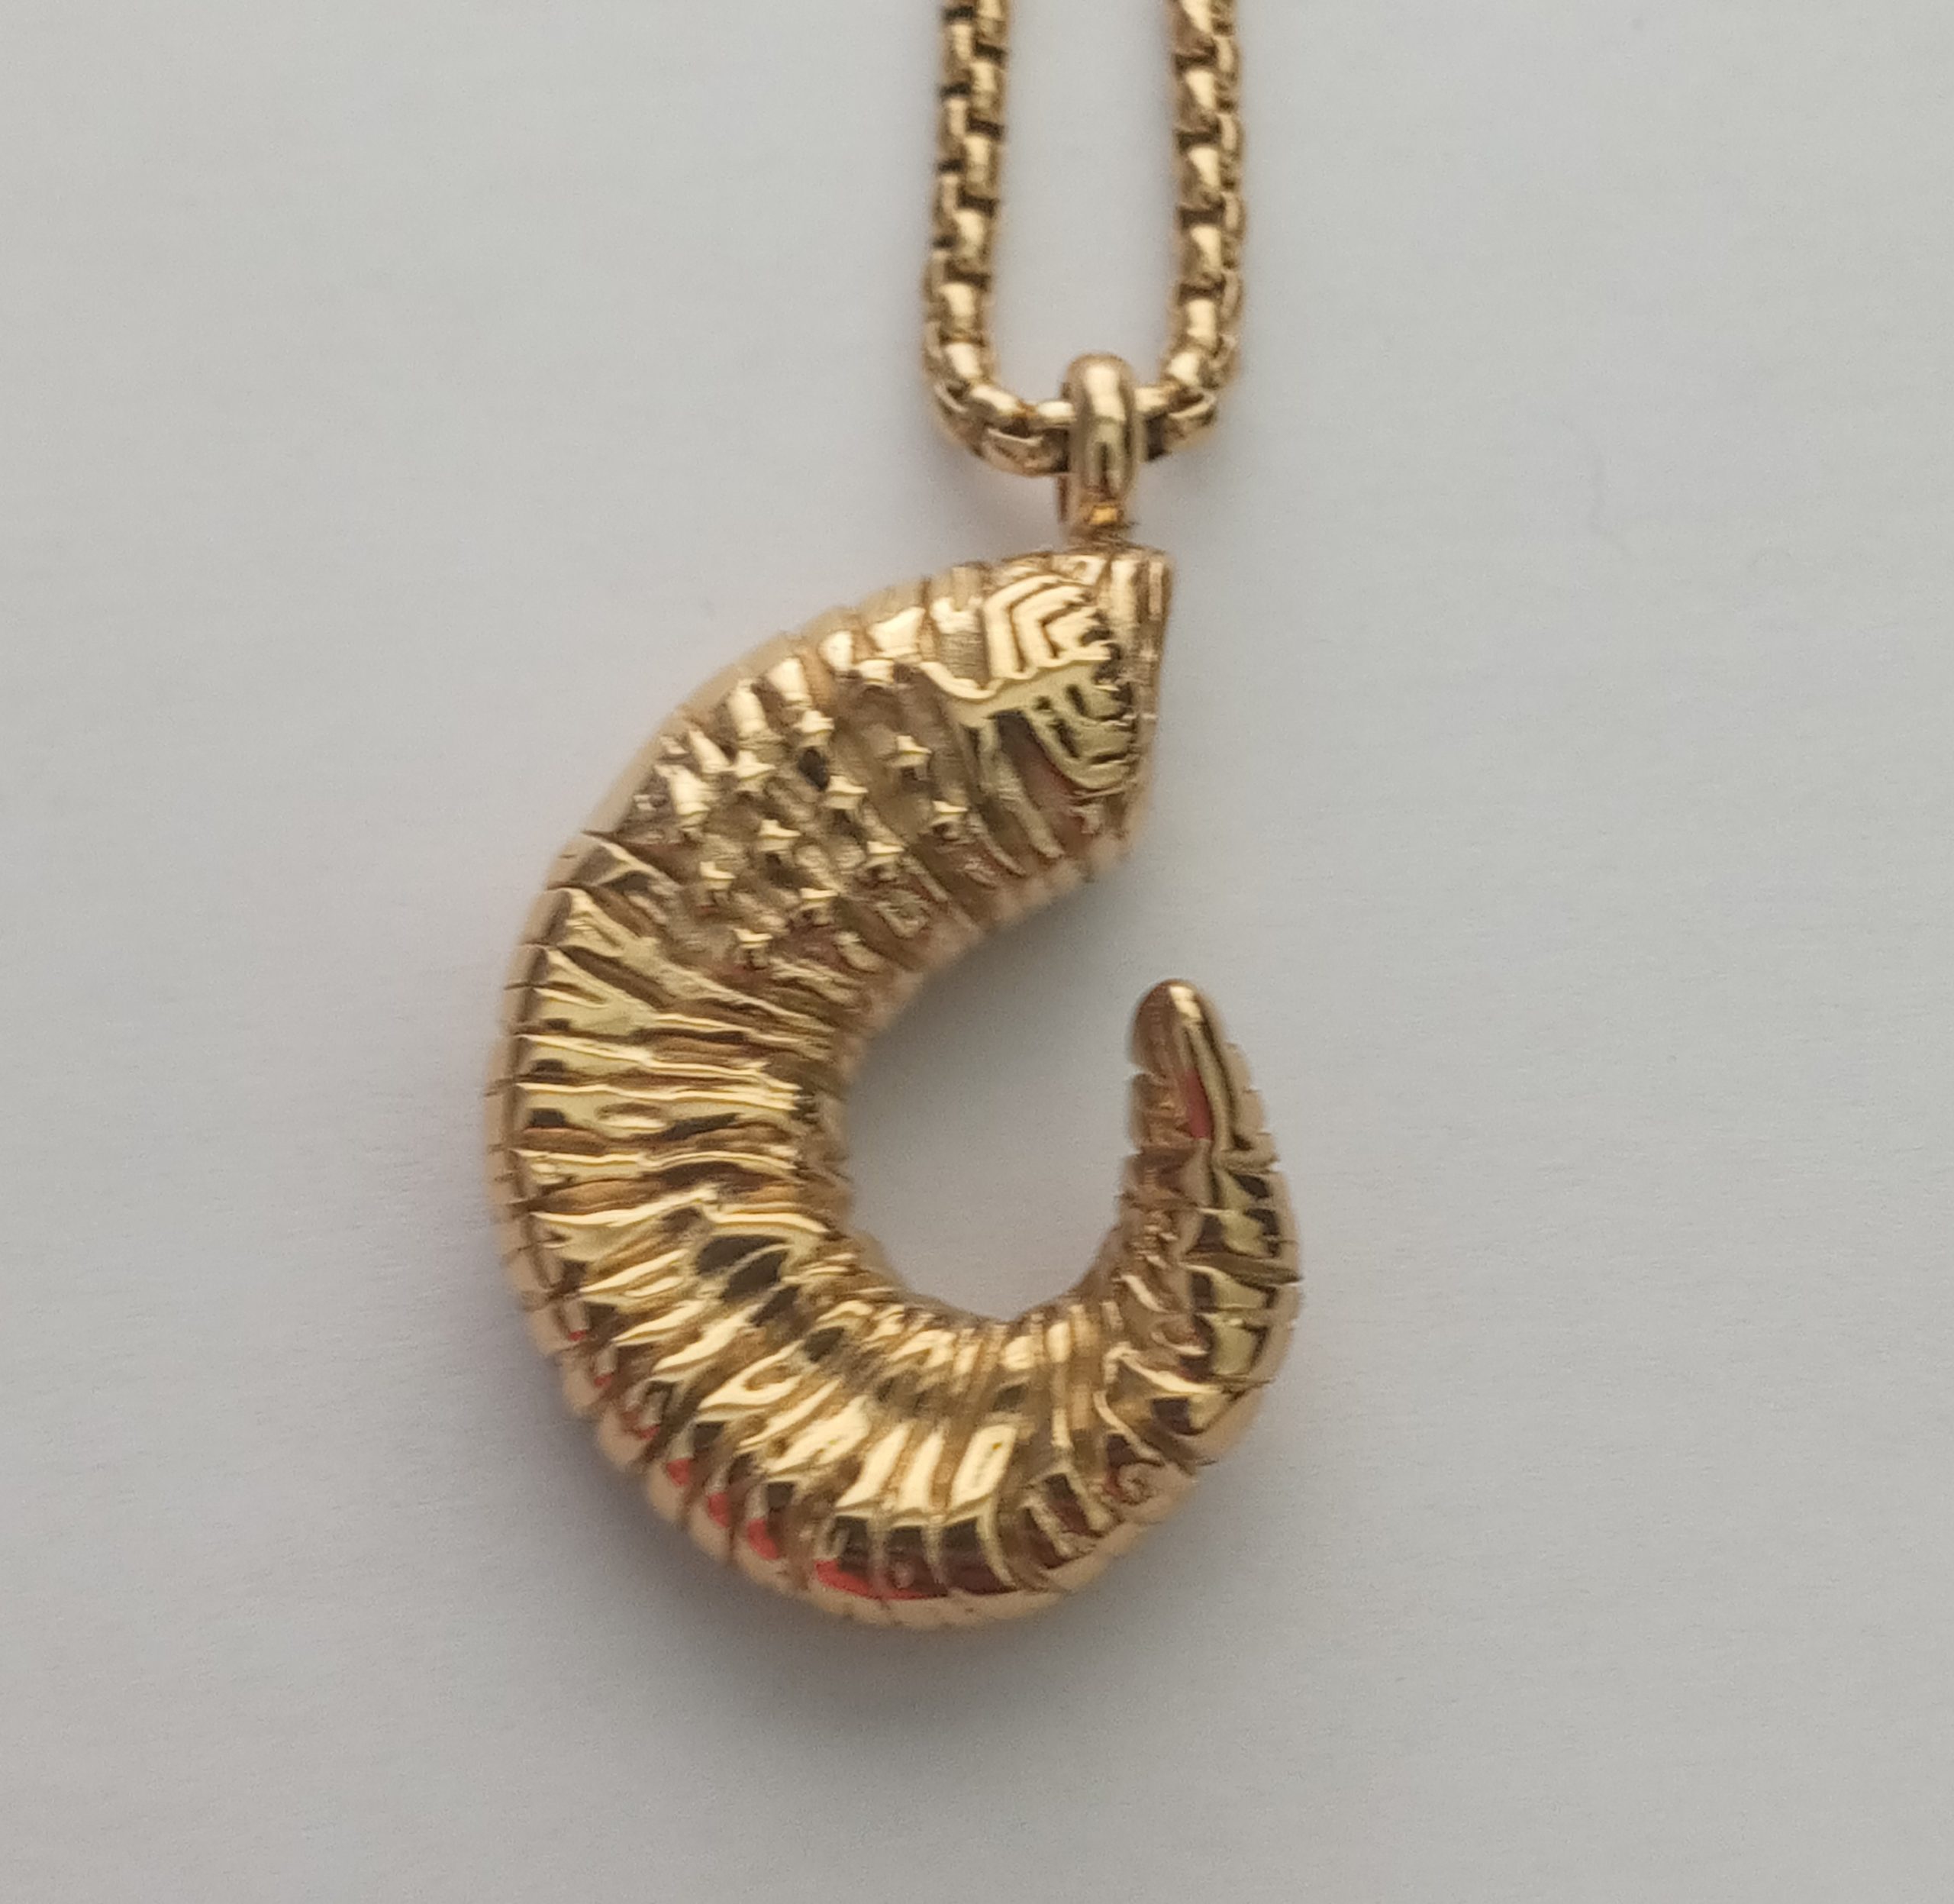 Rams horn necklace